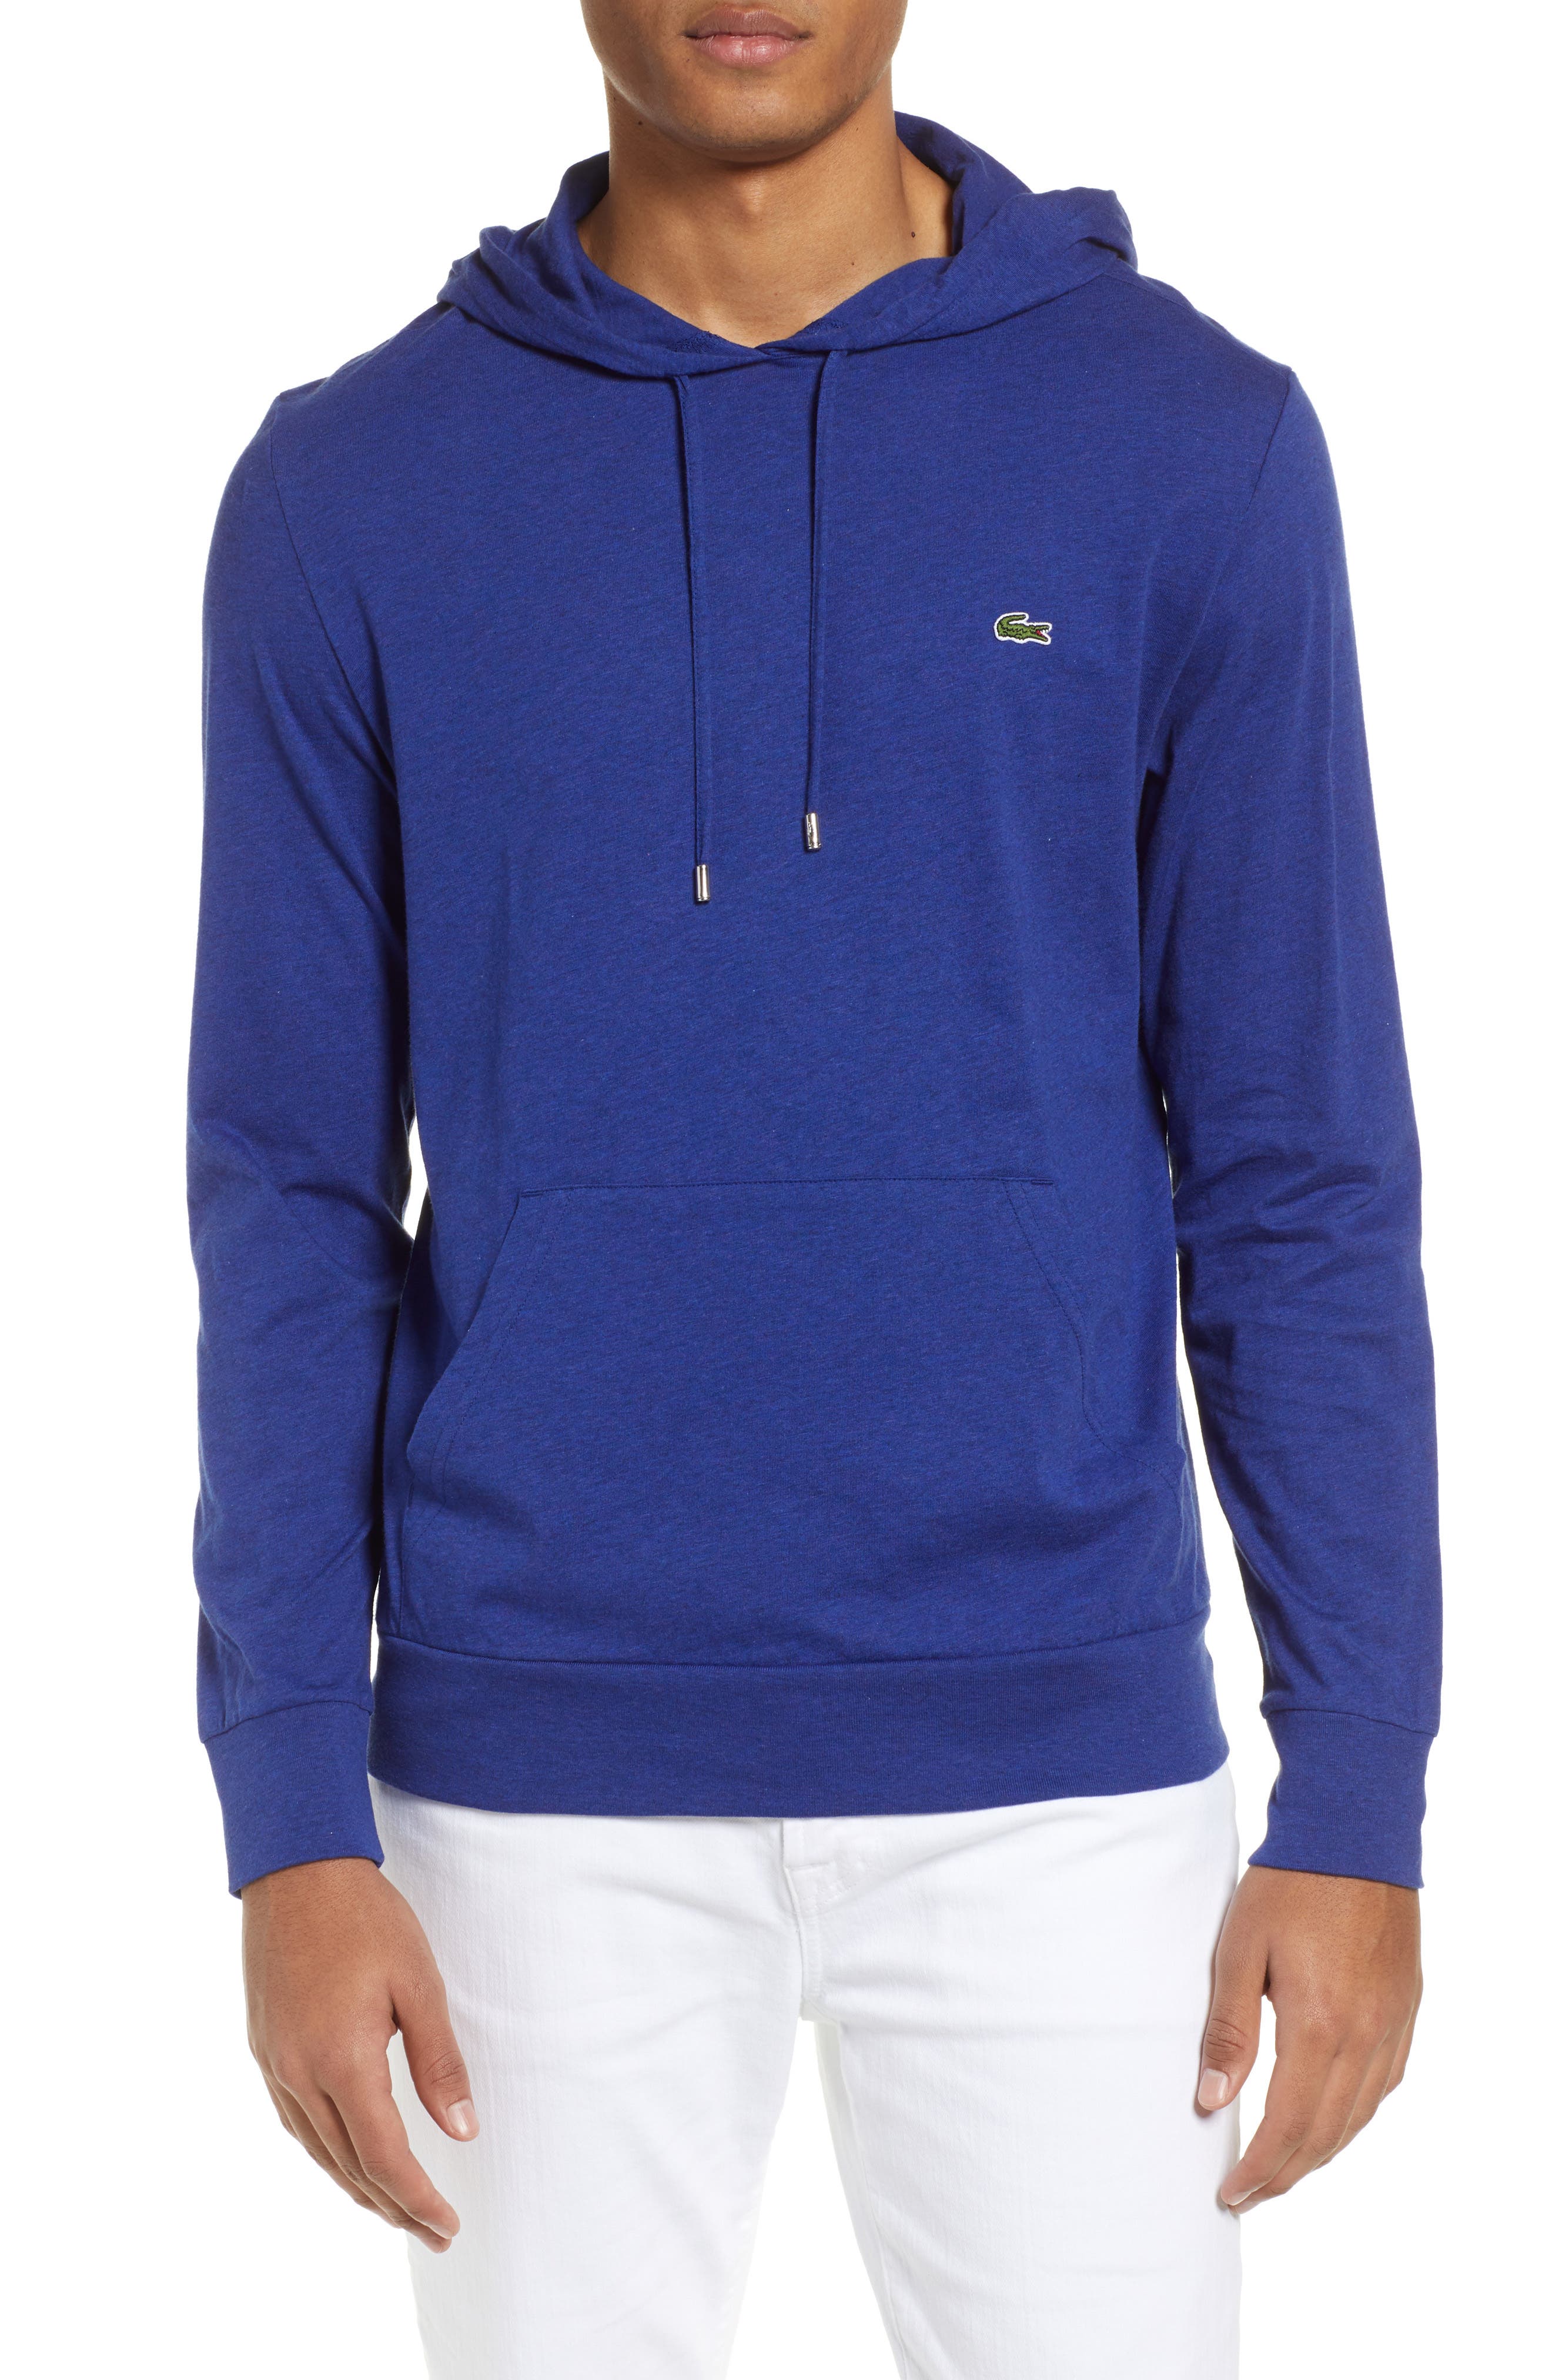 lacoste hoodie price